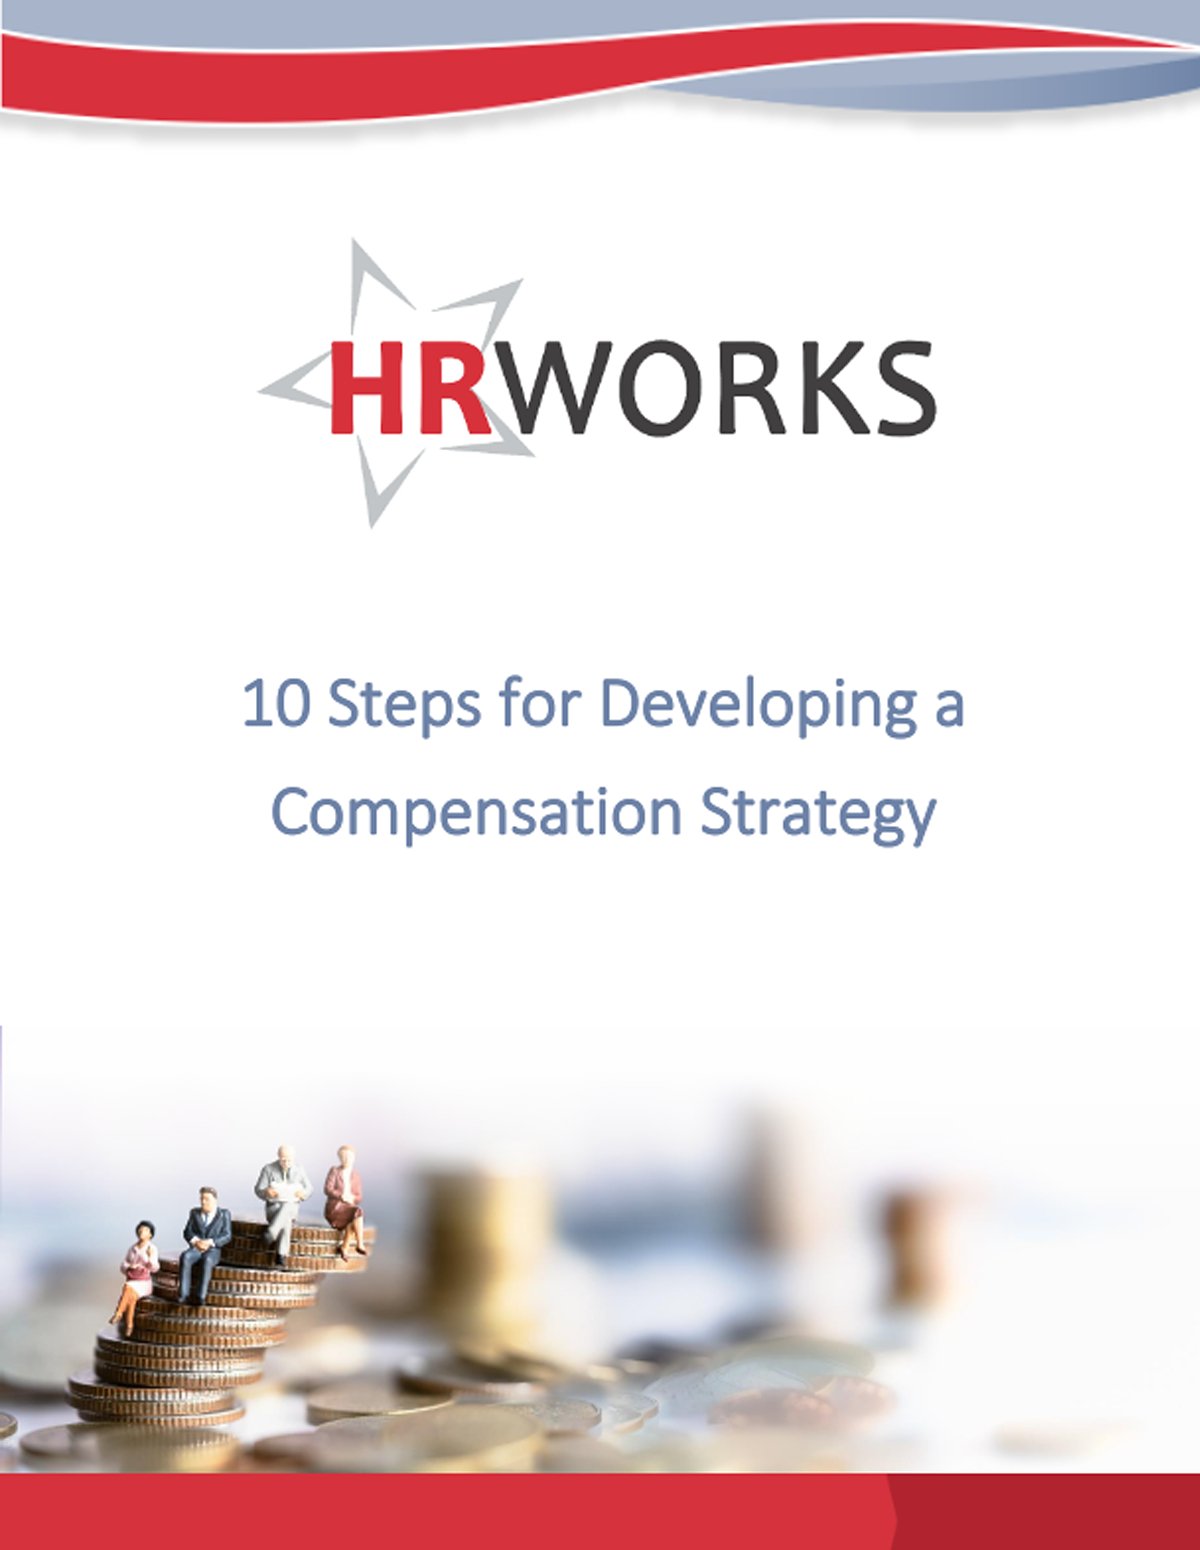 10 Steps for Developing a Compensation Strategy